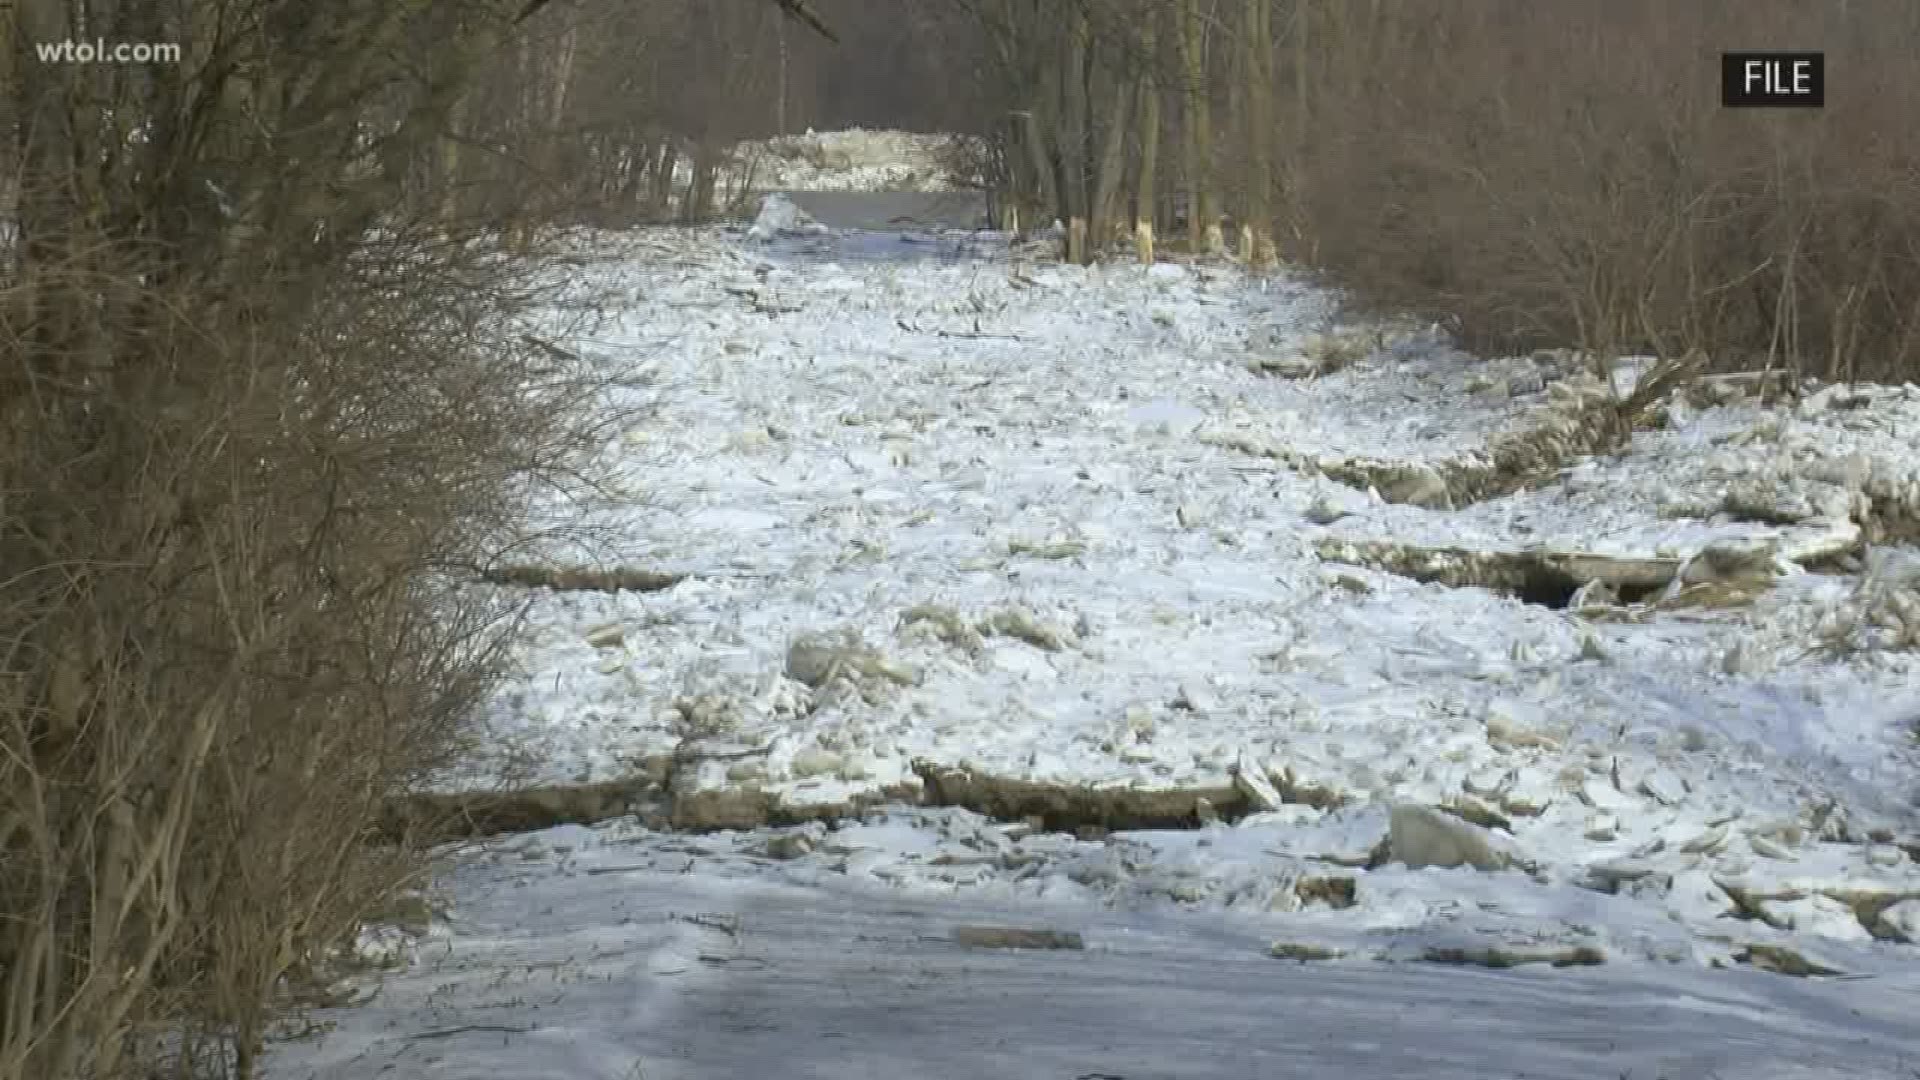 Ice jam damage from last winter still hasn't been fixed. The park district wants to implement better and permanent improvements.